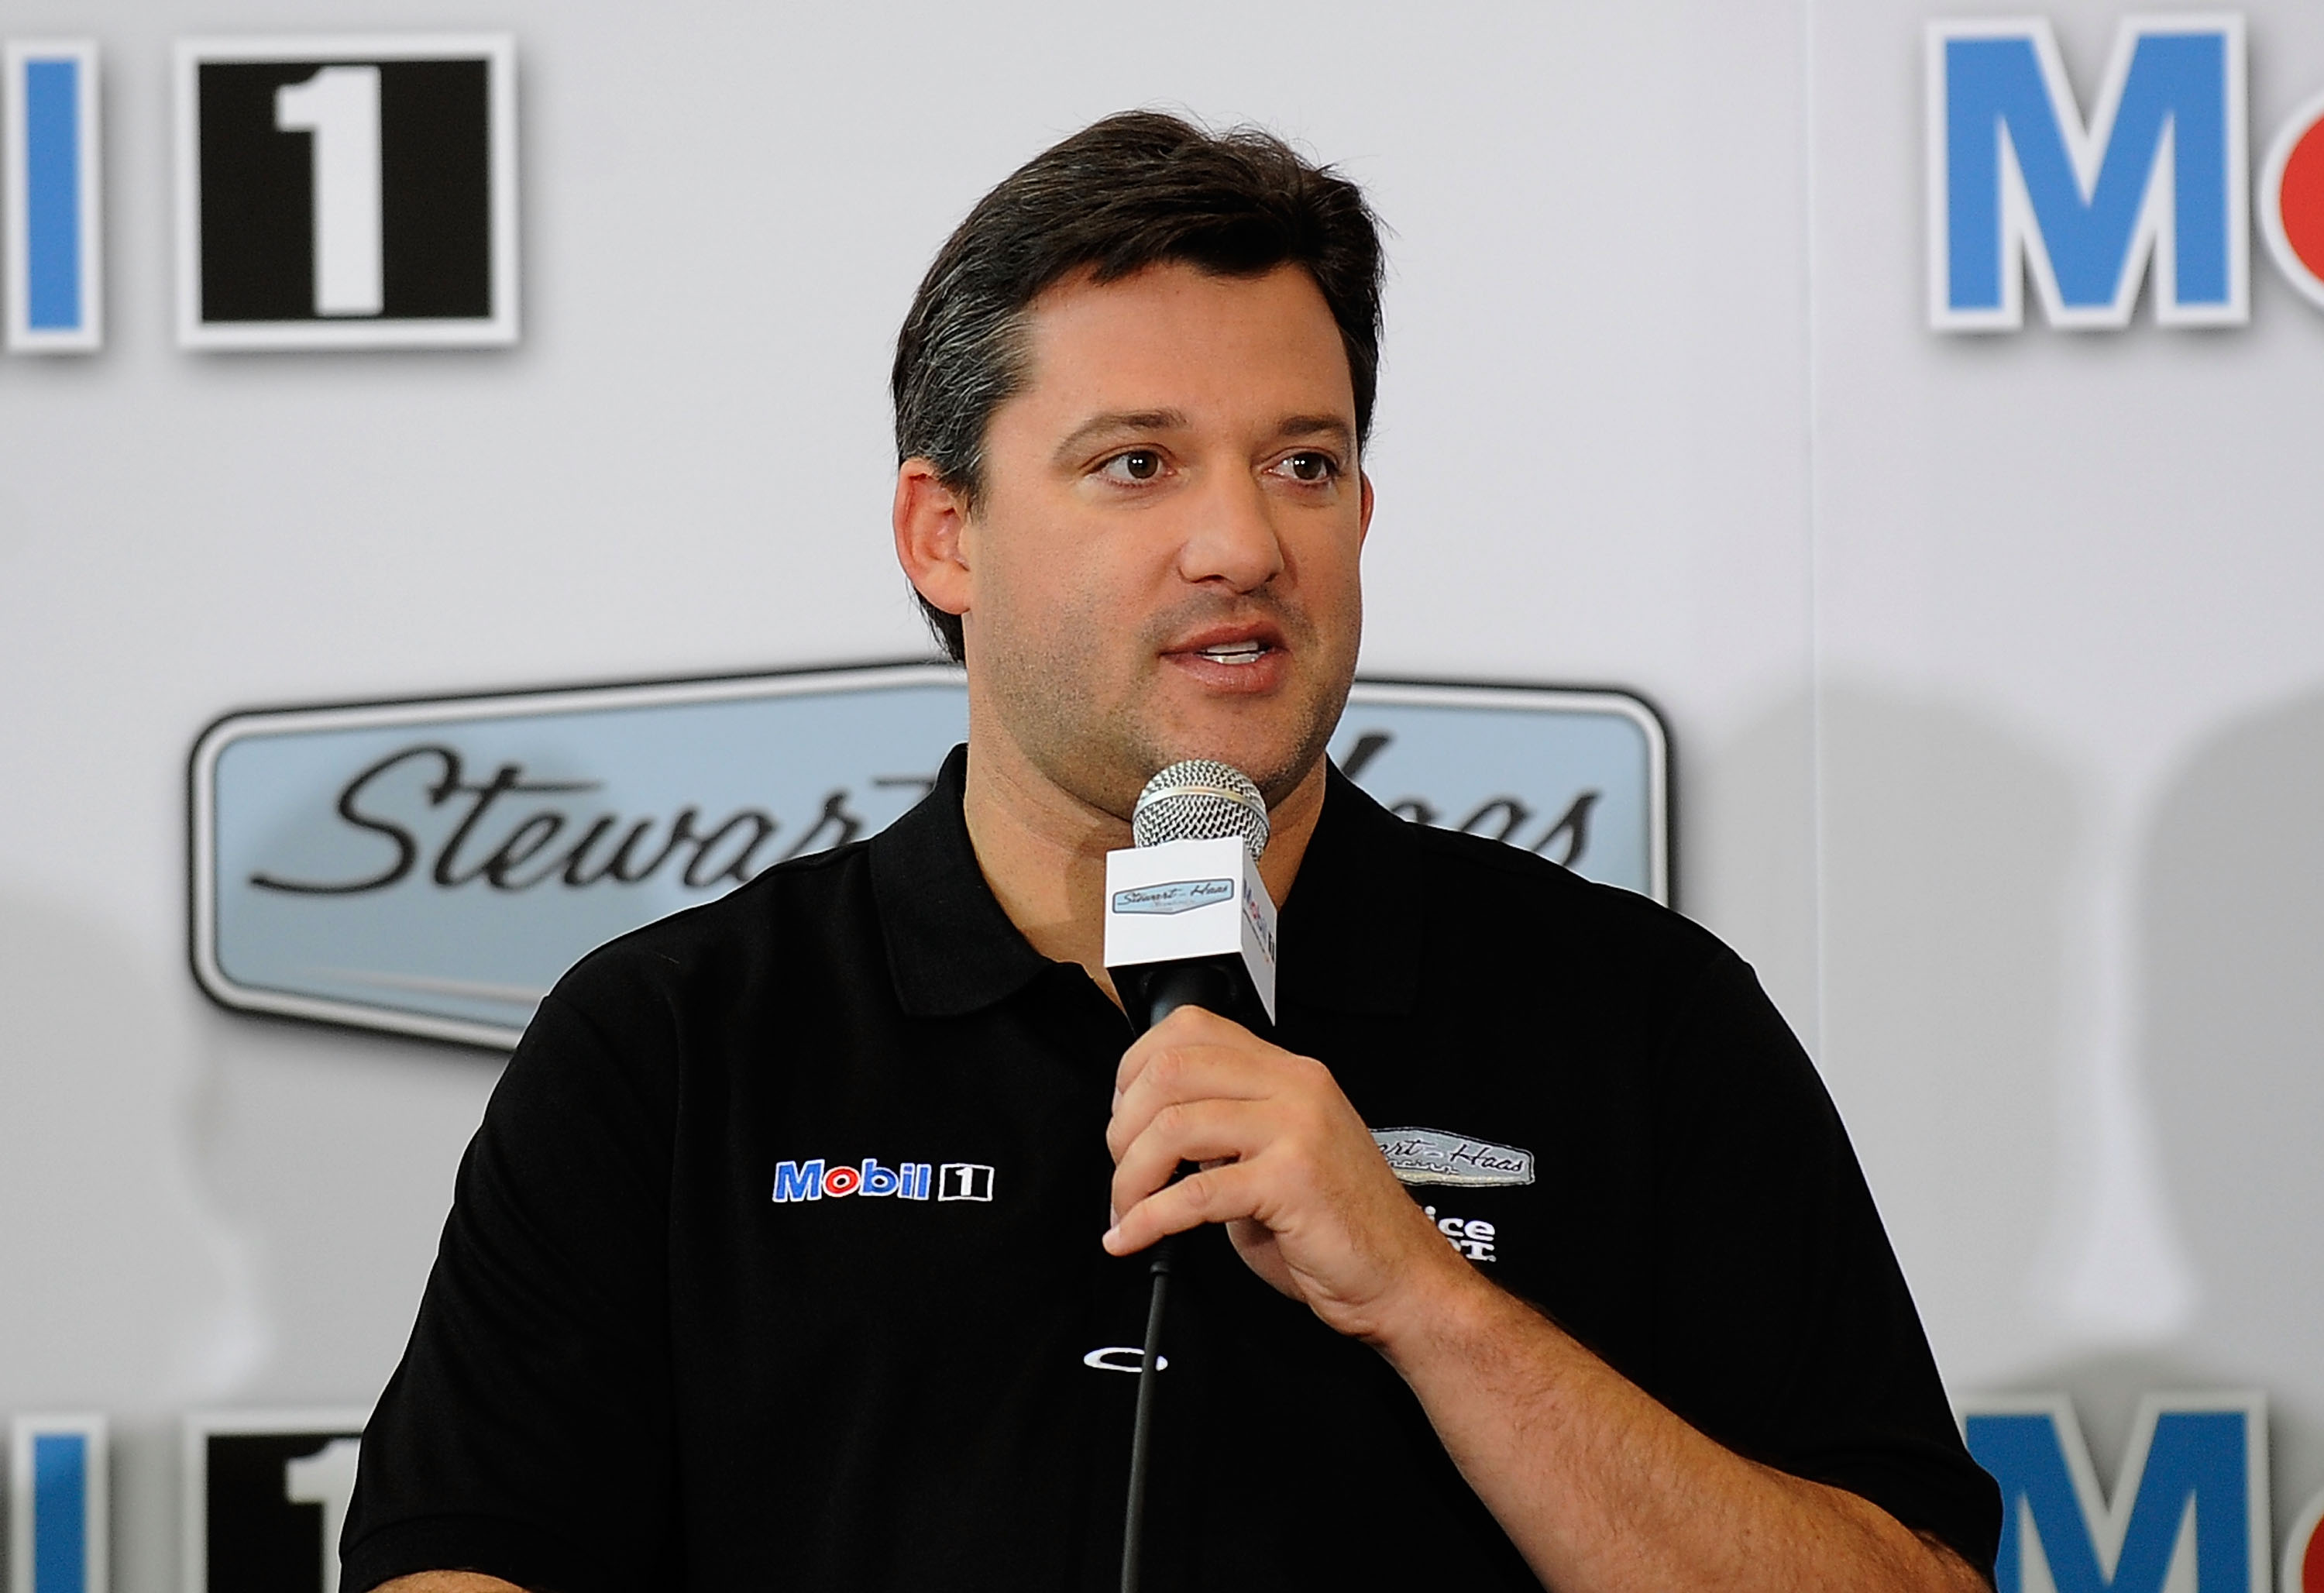 KANNAPOLIS, NC - OCTOBER 12:  Tony Stewart, Stewart-Haas Racing's driver/owner, announced Mobil 1 as his co-primary sponsor with Office Depot beginning in 2011 at Stewart-Haas Racing on October 12, 2010 in Kannapolis, North Carolina.  (Photo by Rusty Jarr